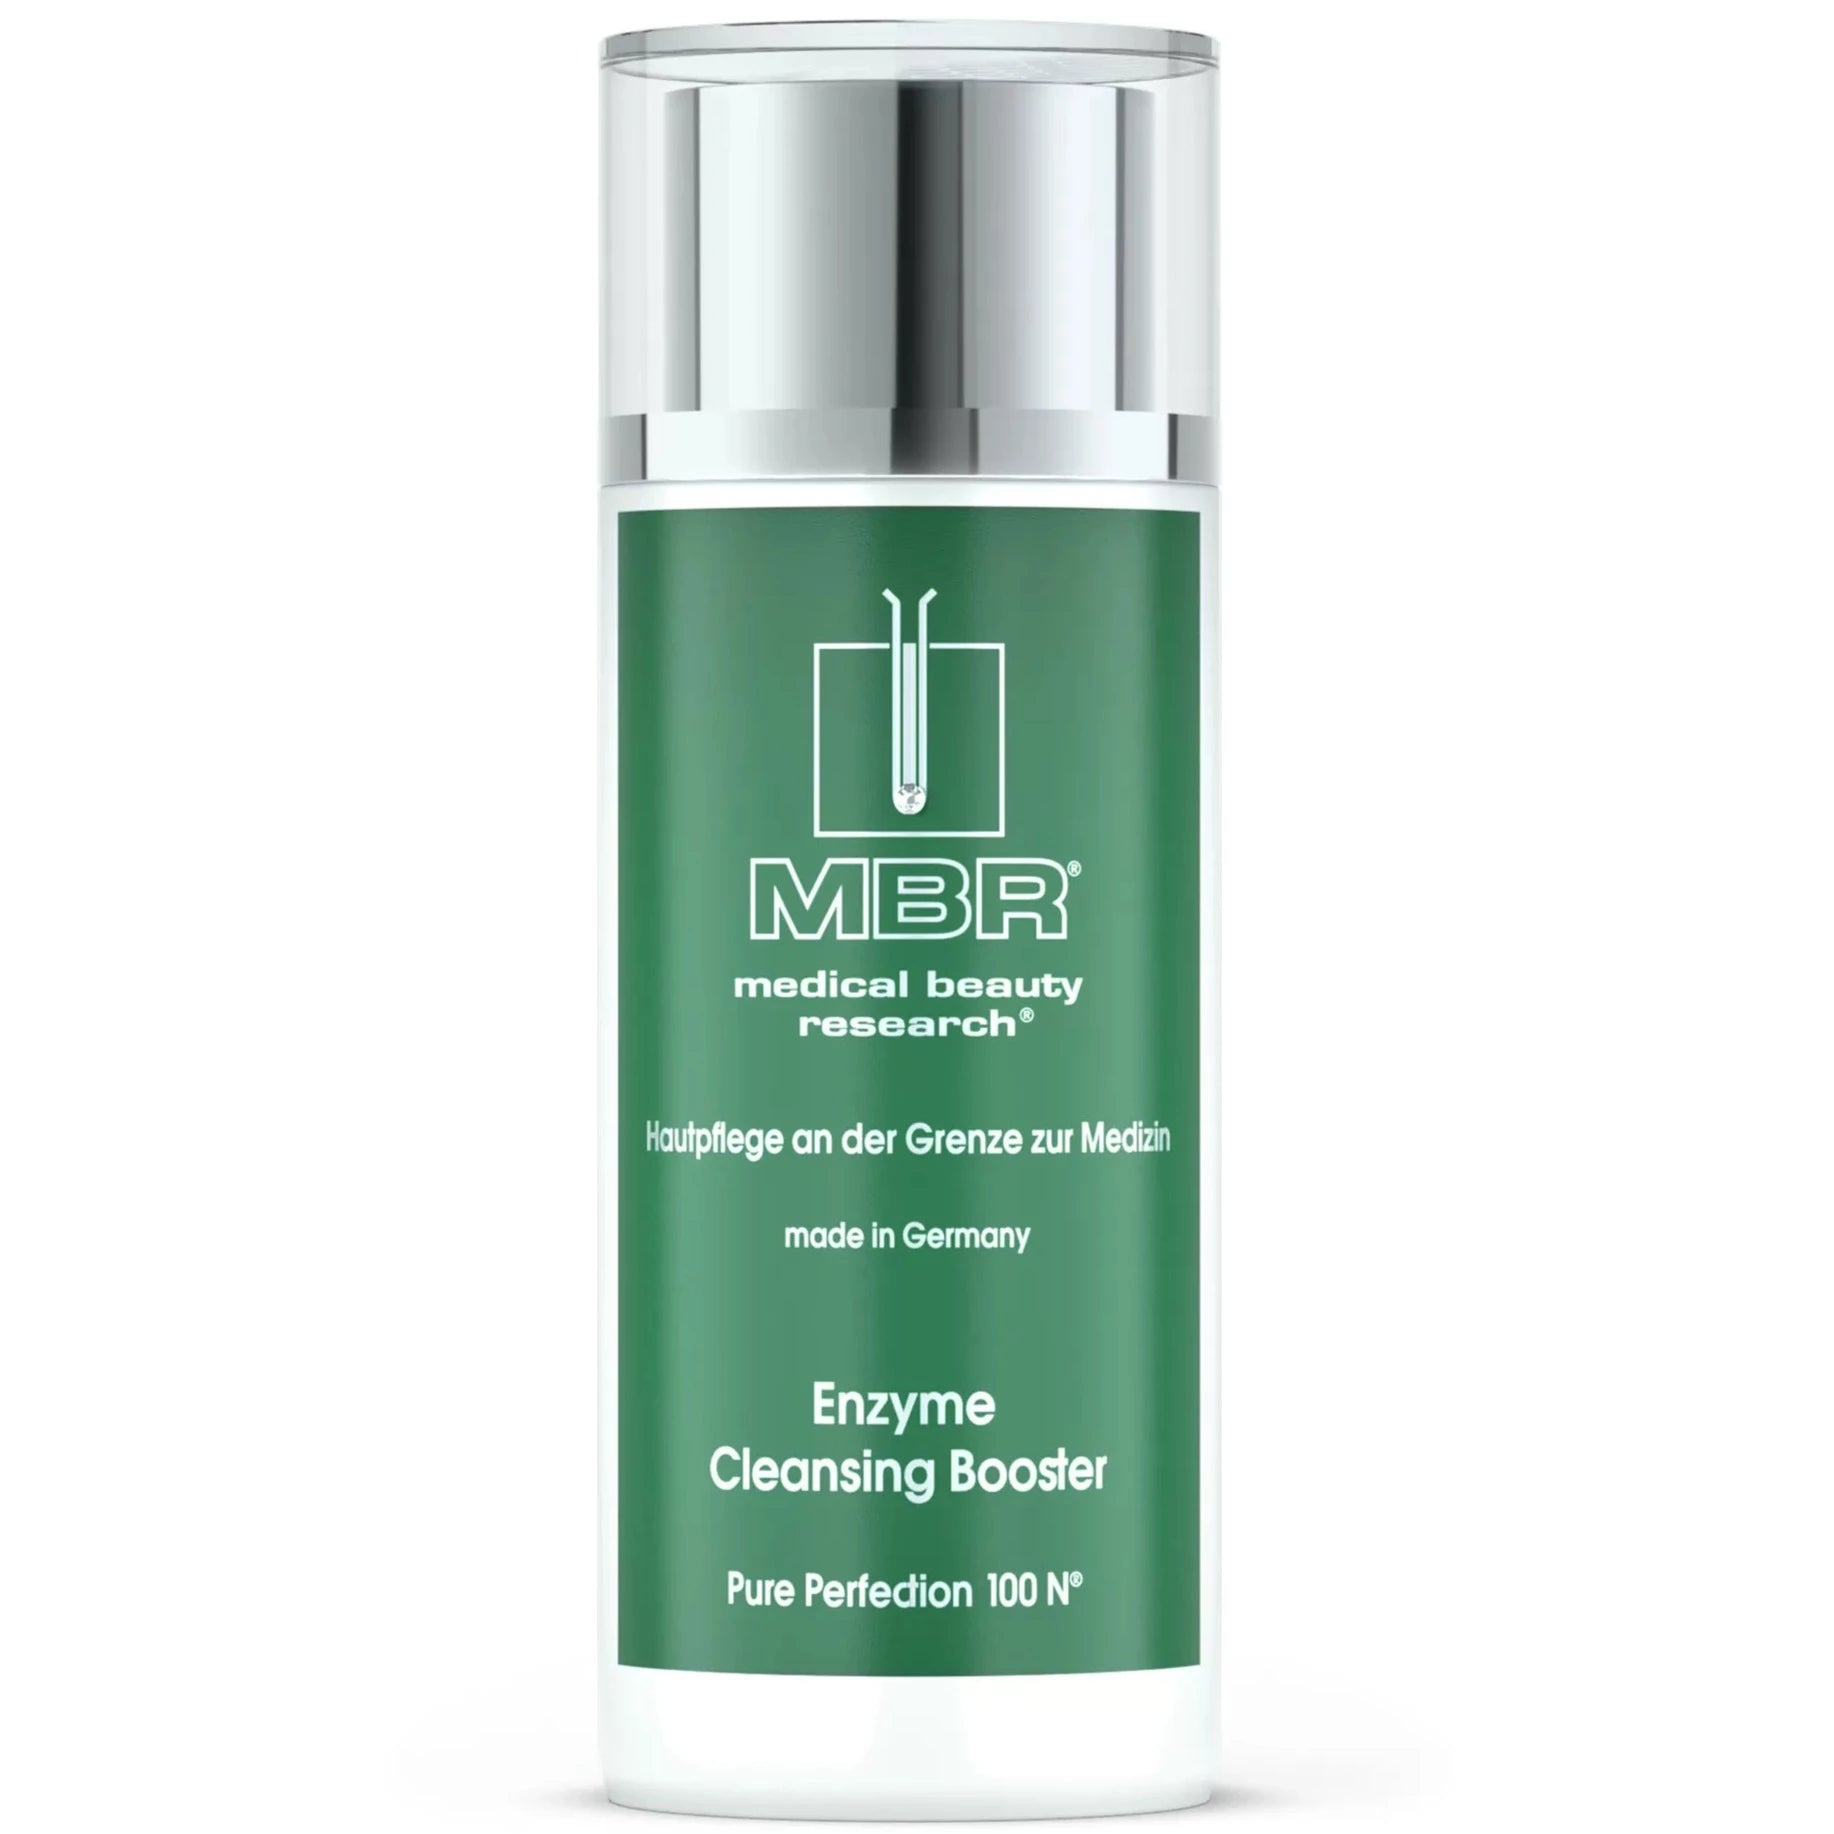 Enzyme Cleansing Booster